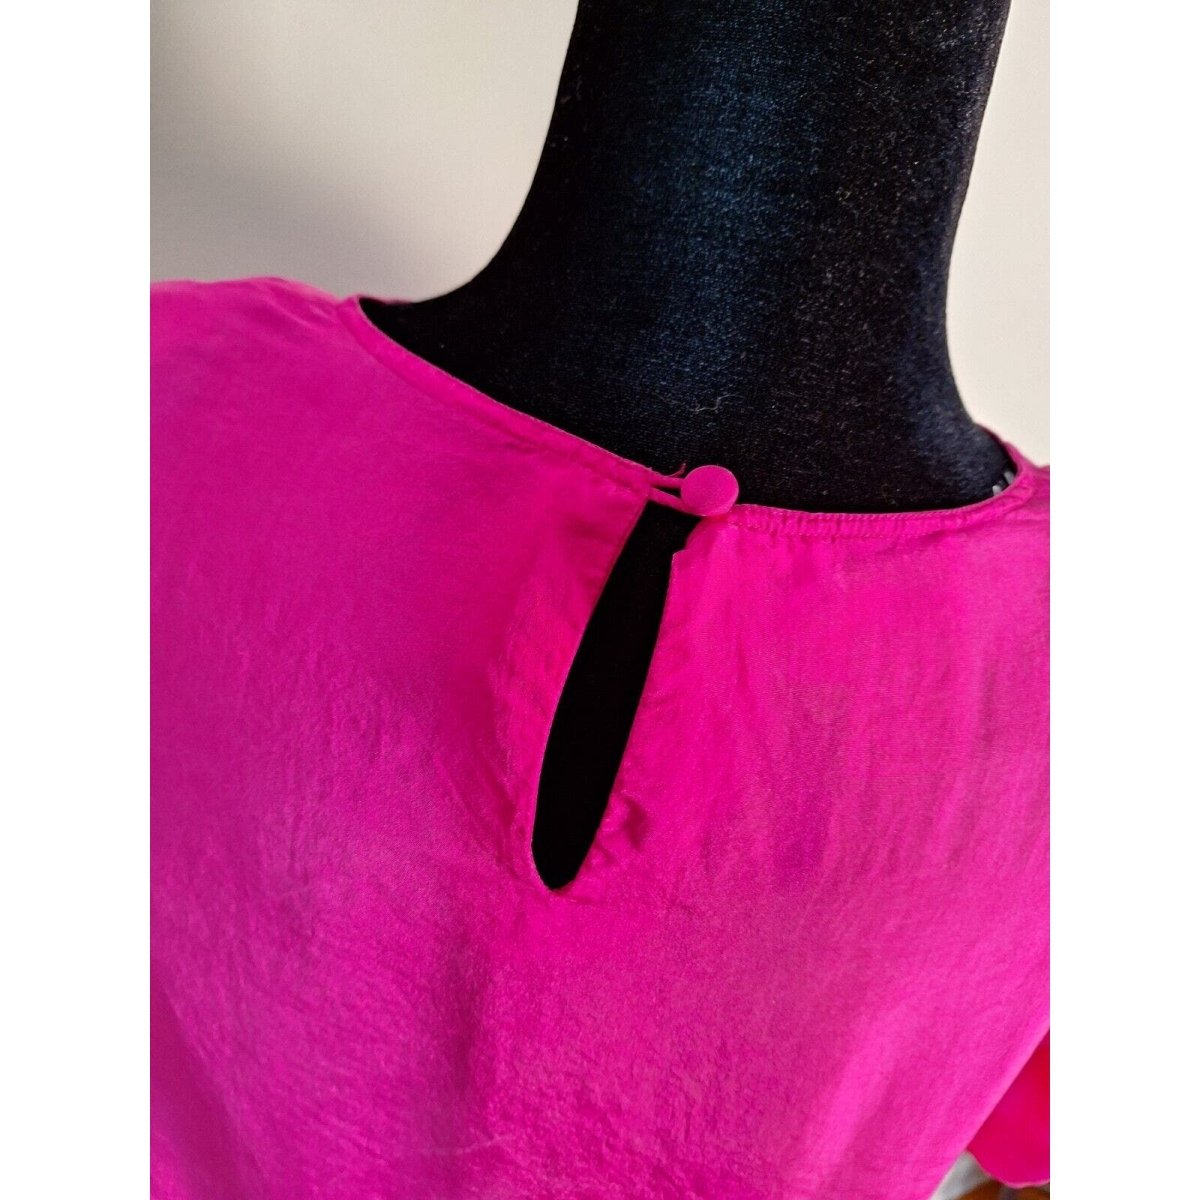 Vintage All Silk Boxy Hot Pink Blouse Women Size Medium AS IS - themallvintage The Mall Vintage